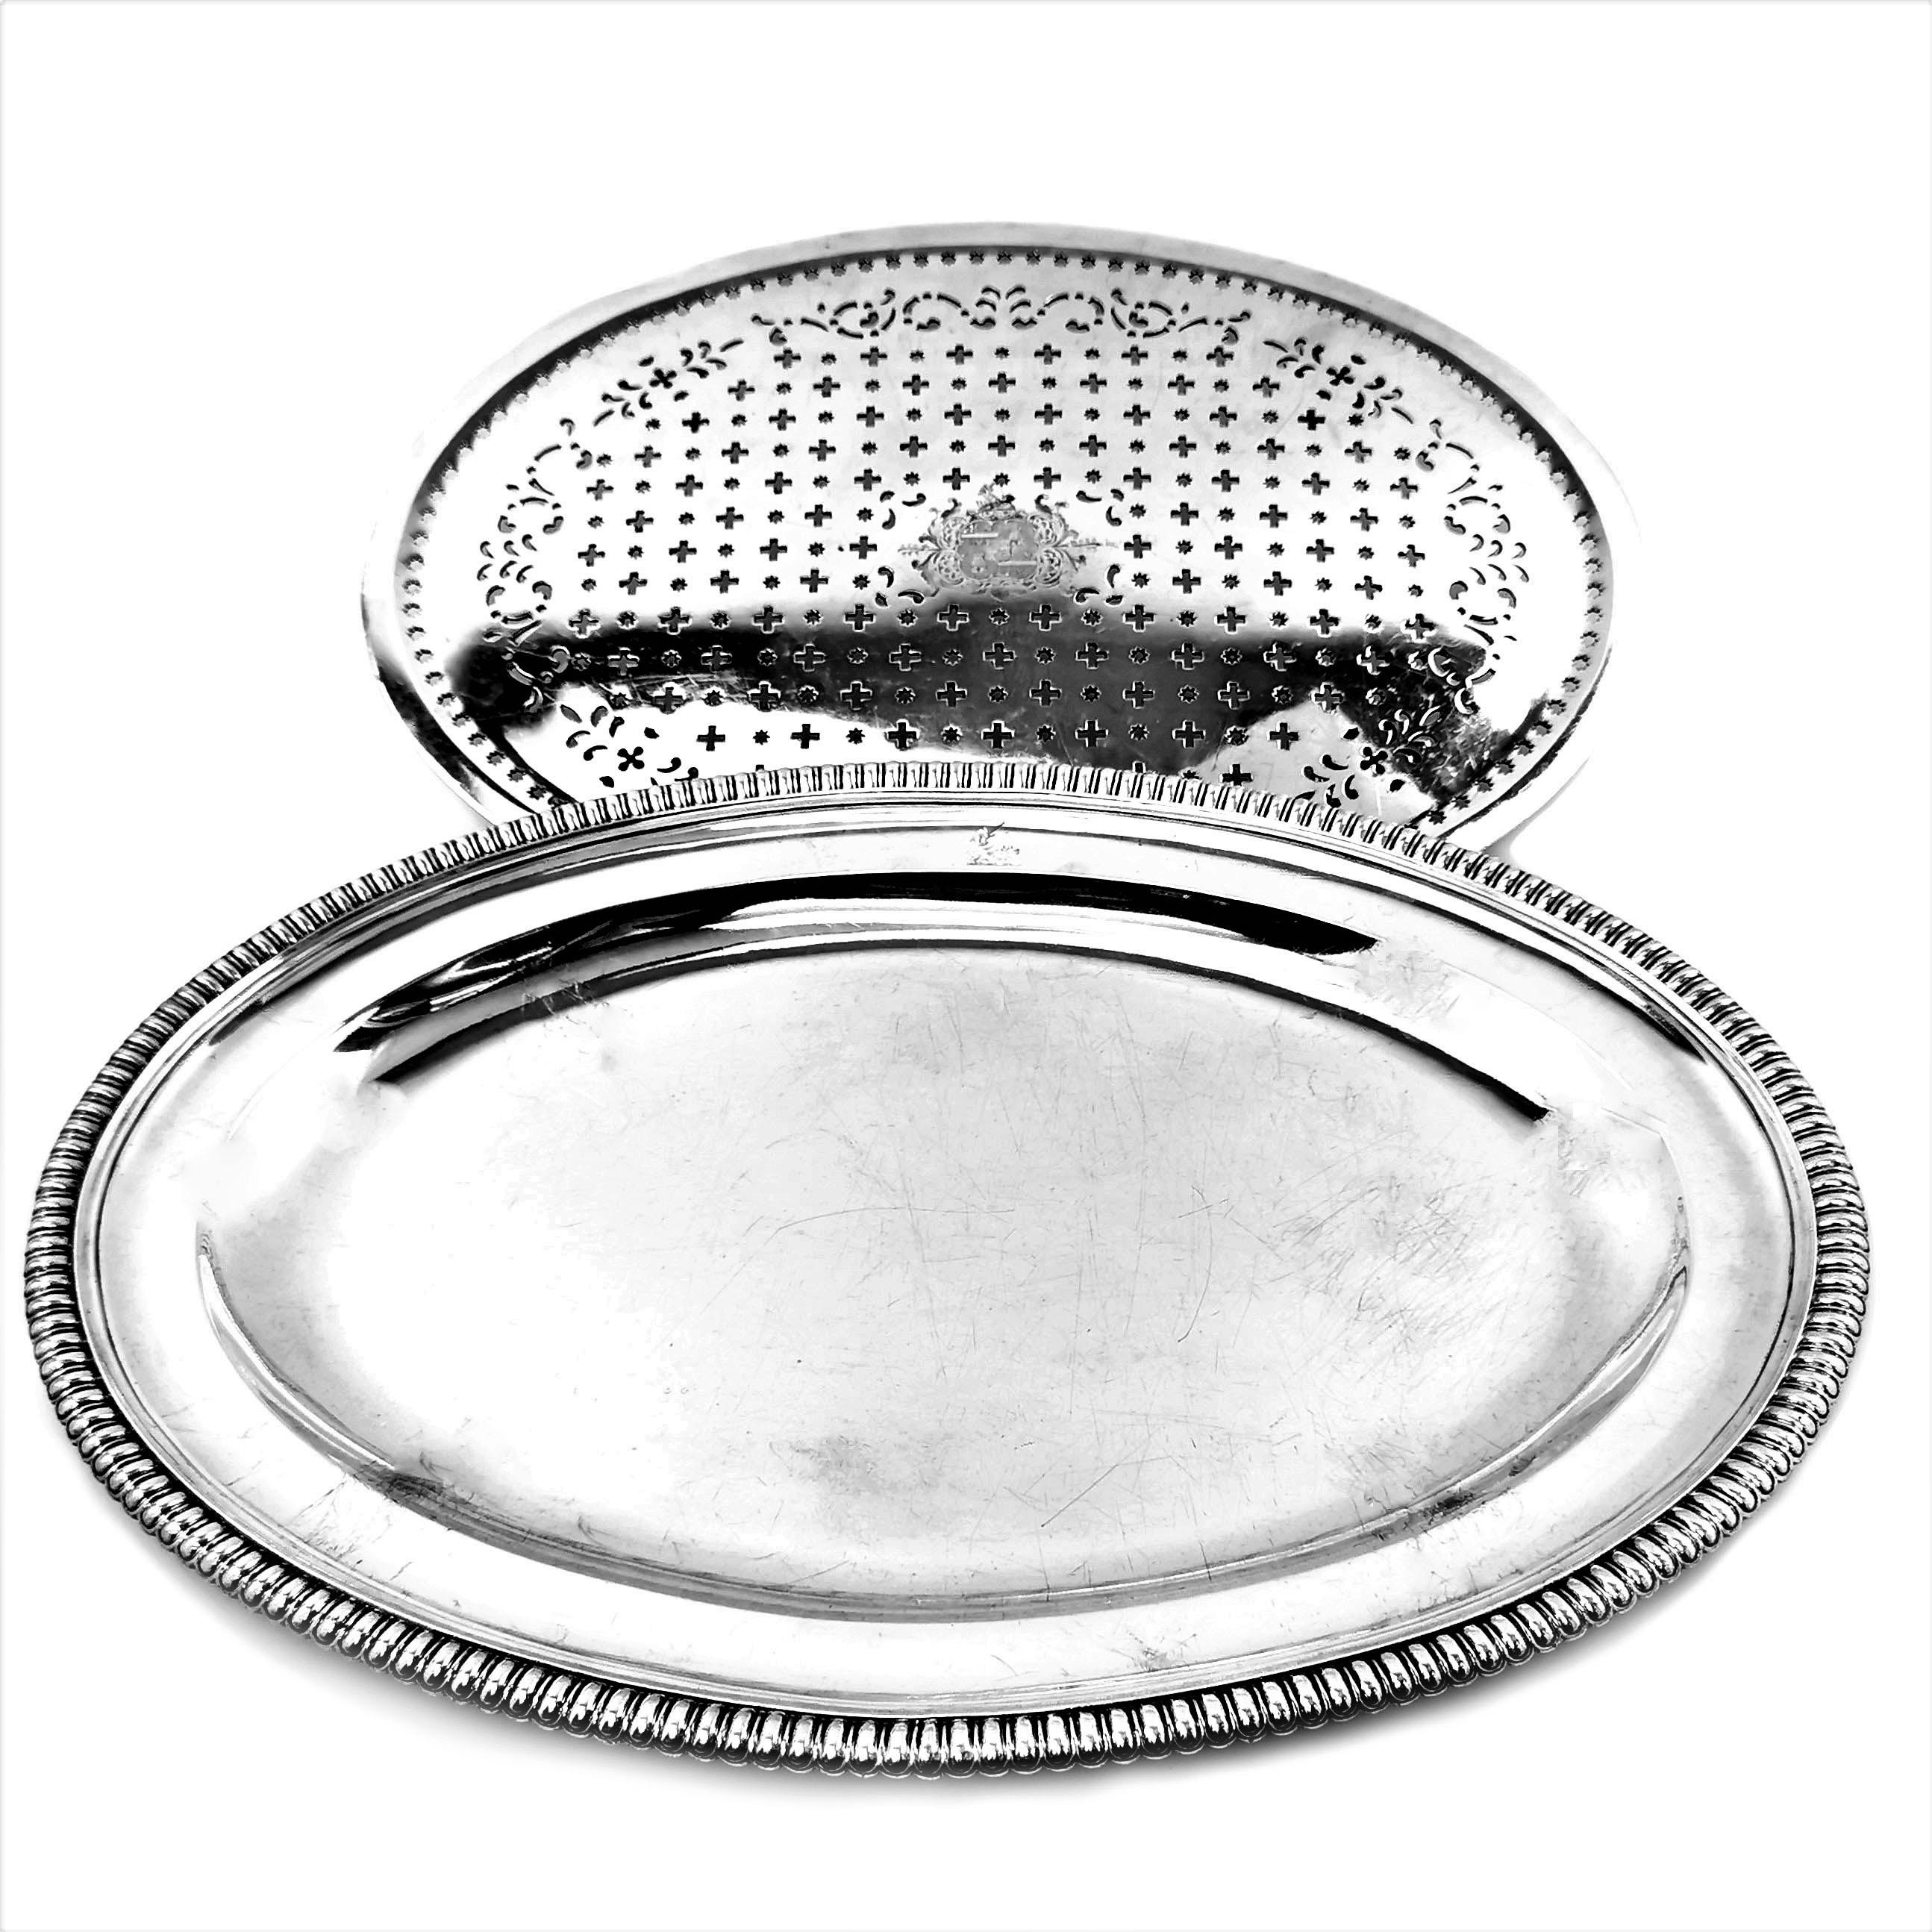 A magnificent antique Georgian sterling Silver Oval Meat Platter with a classic gadroon edge border. The Platter has a fitted oval Mazarine with a decorative pierced pattern to allowed the meat juices to drain into the platter below. The Platter can